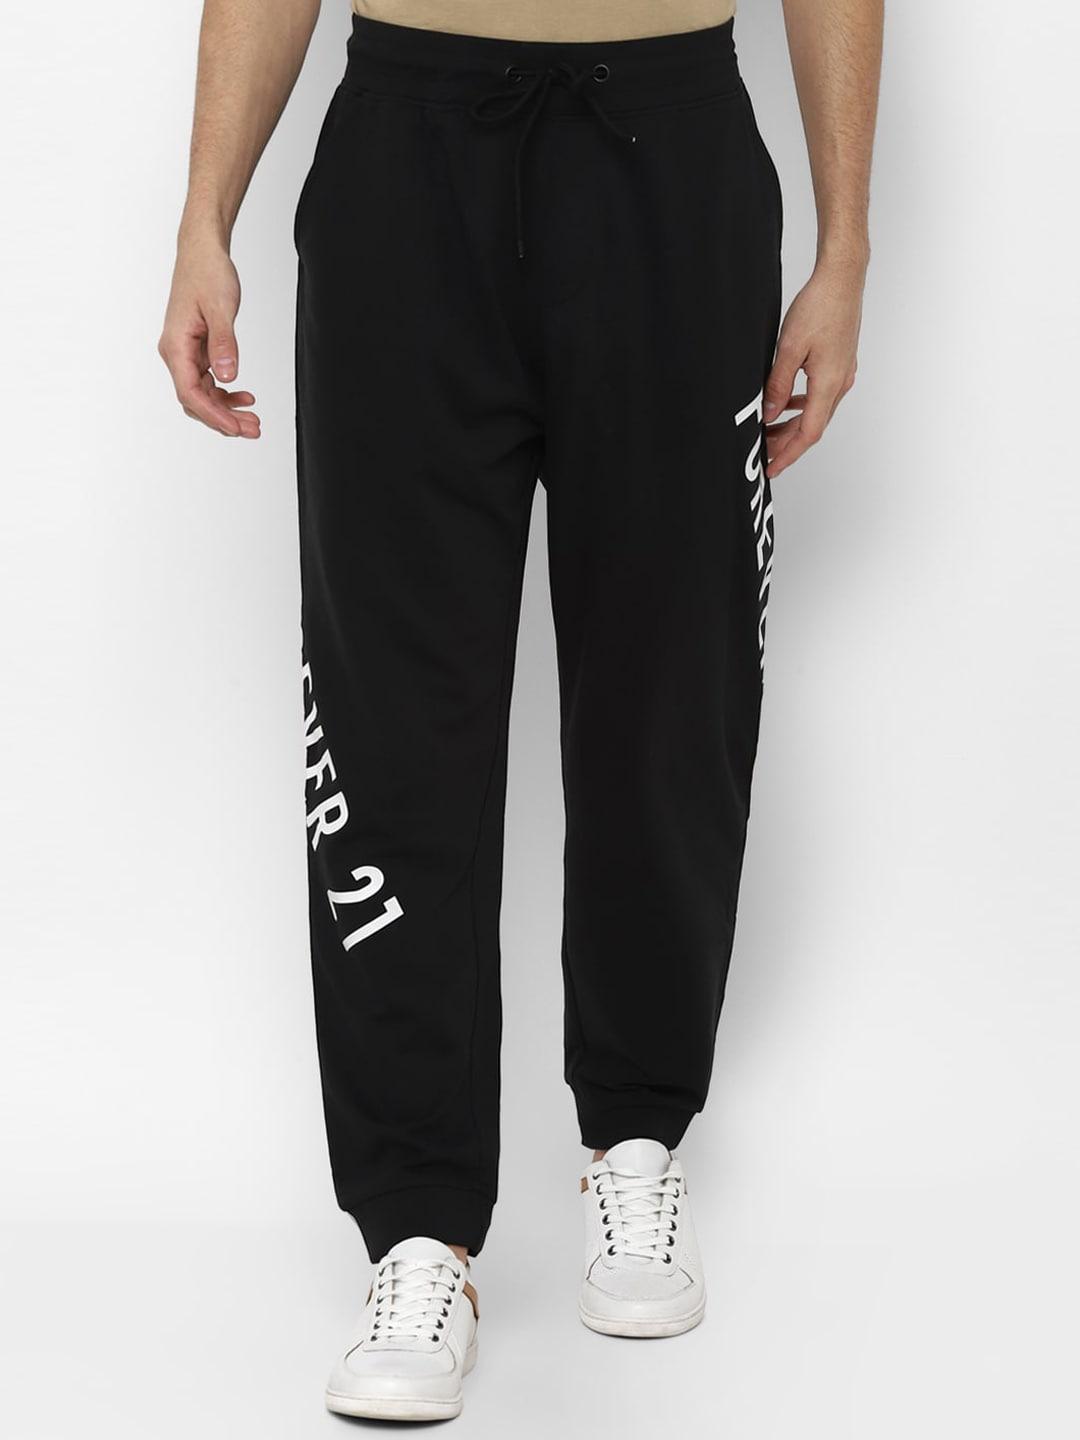 FOREVER 21 Men Black Printed Joggers Trousers